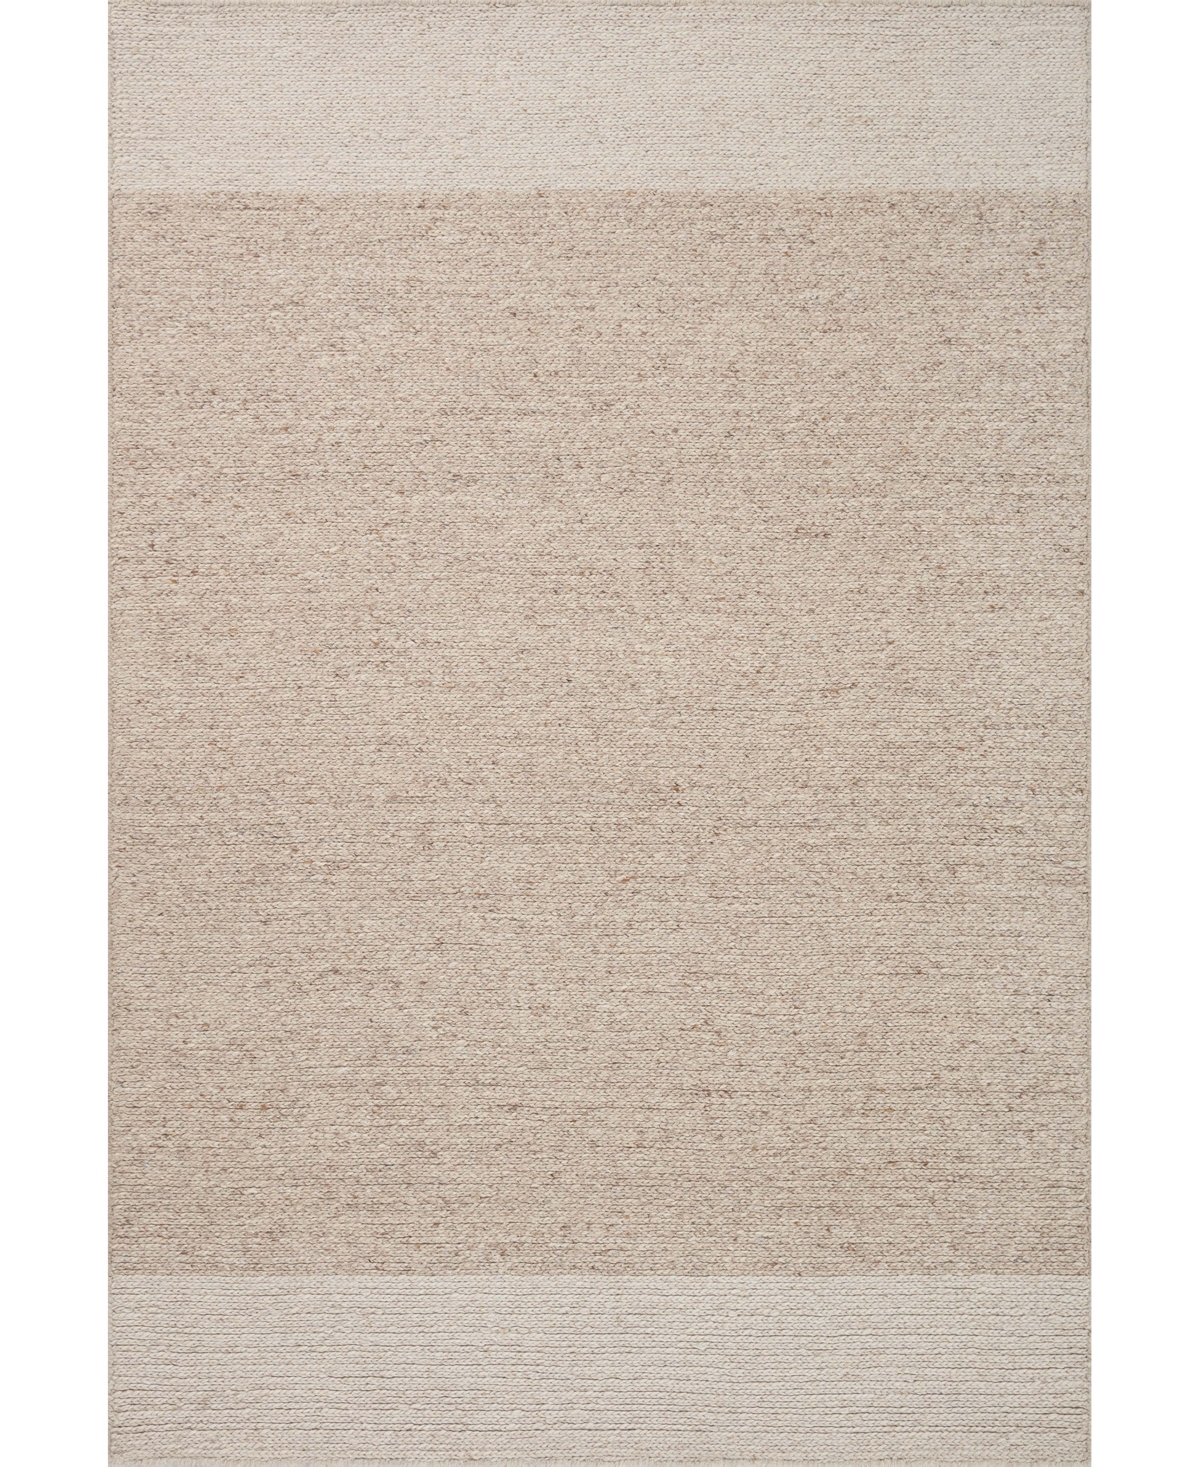 Magnolia Home By Joanna Gaines X Loloi Ashby Ash-05 5' X 7'6" Area Rug In Oatmeal